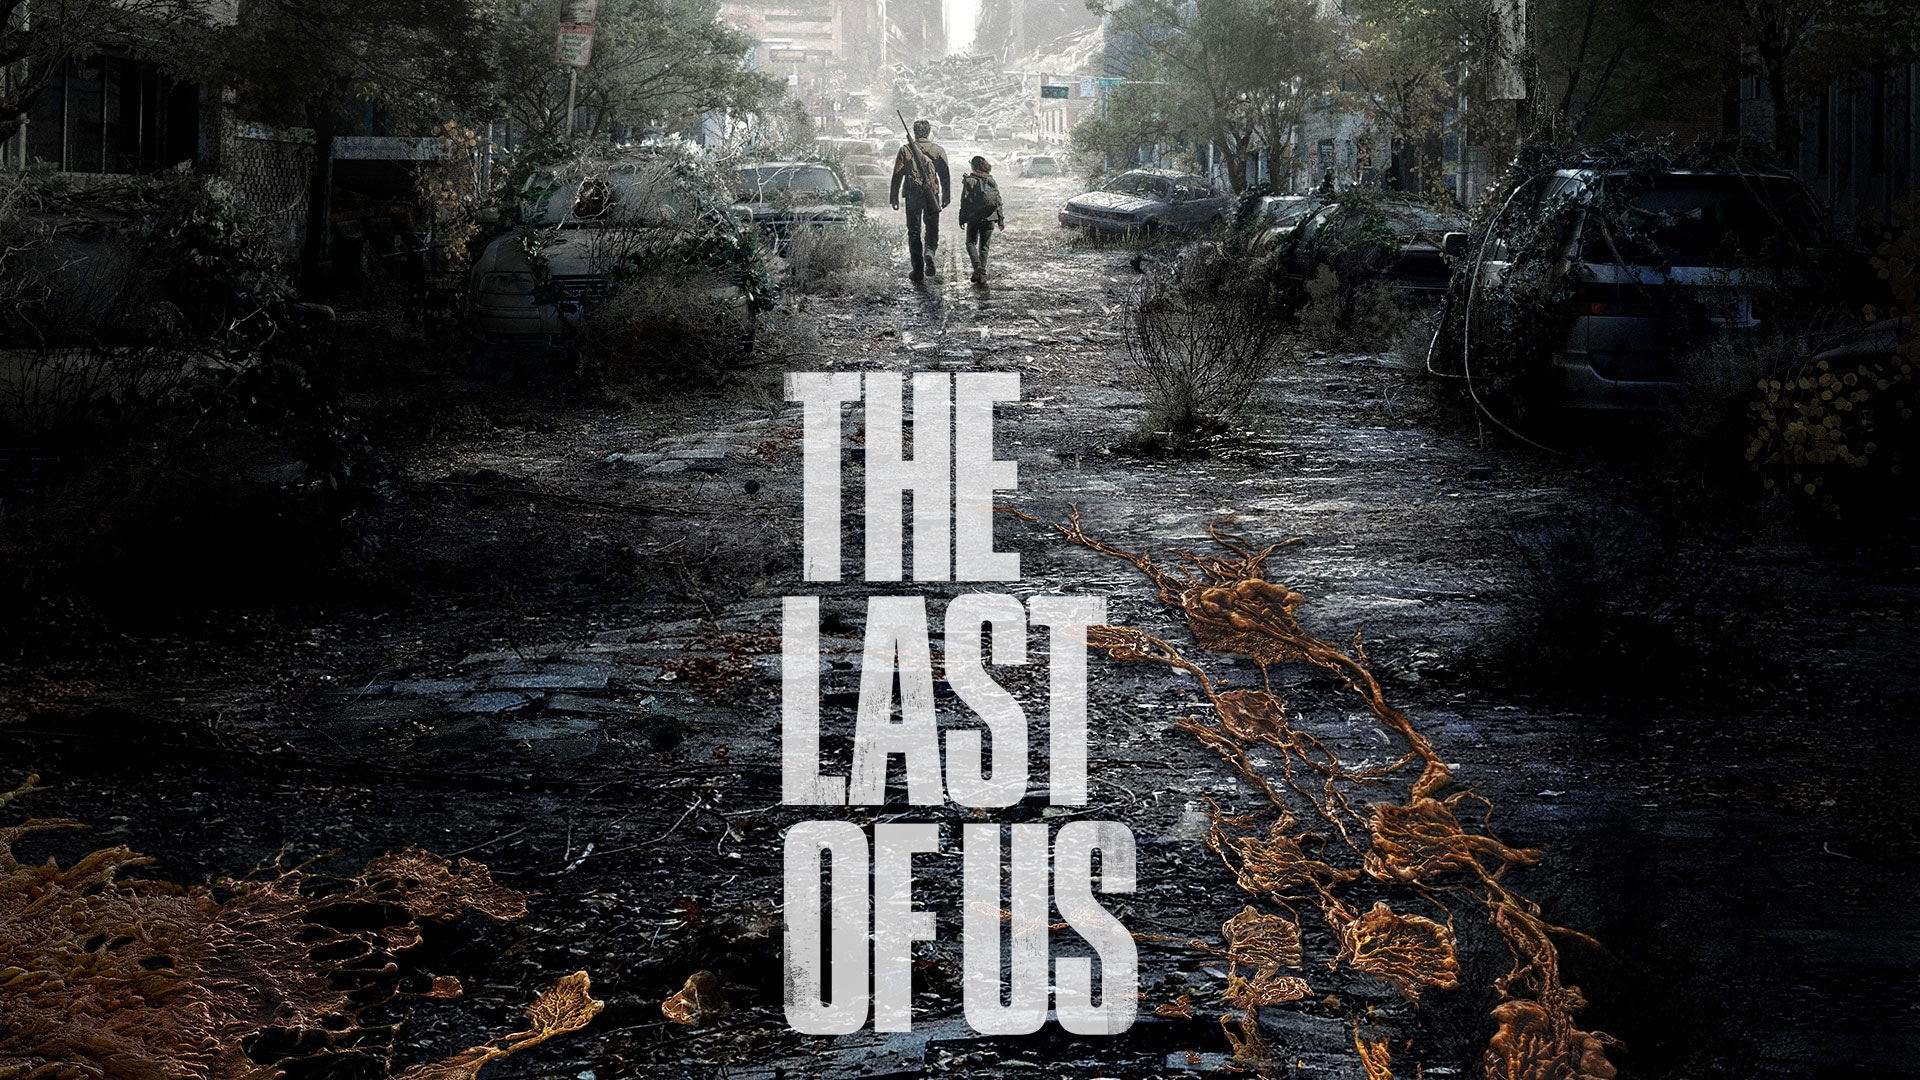 The Last of Us HBO TV Show Adaptation Is Getting a Companion Podcast